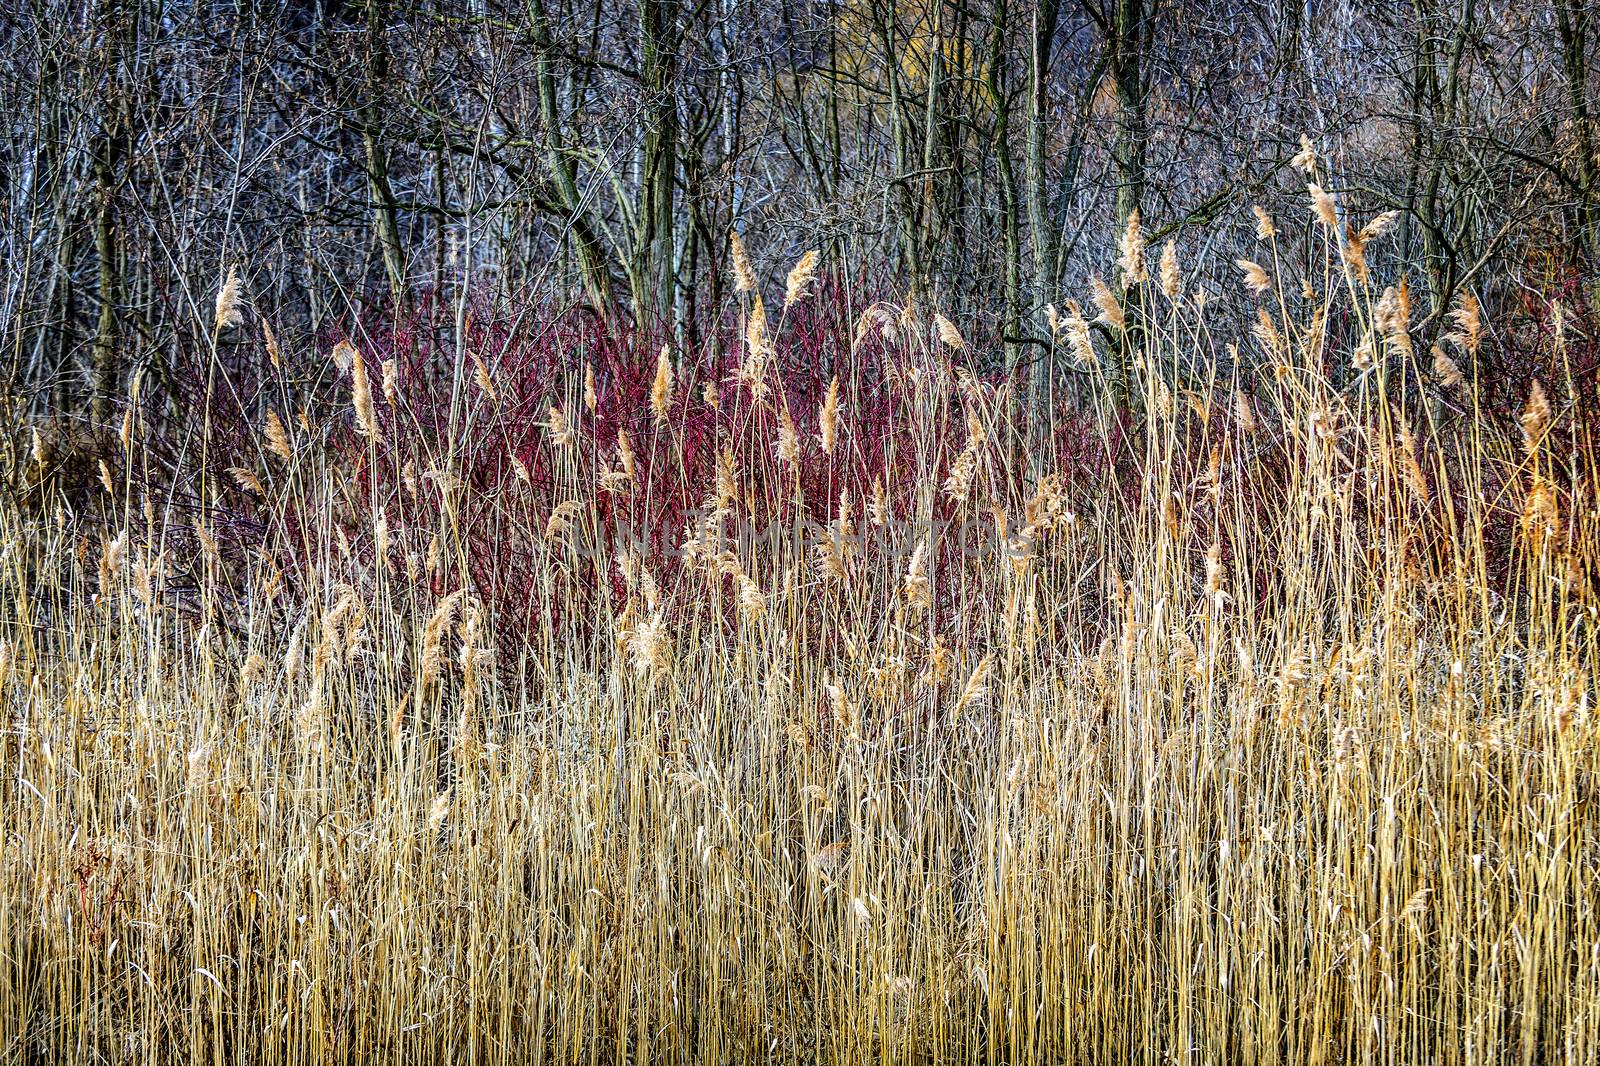 Winter reeds and forest at Scarborough Bluffs in Toronto, Canada.